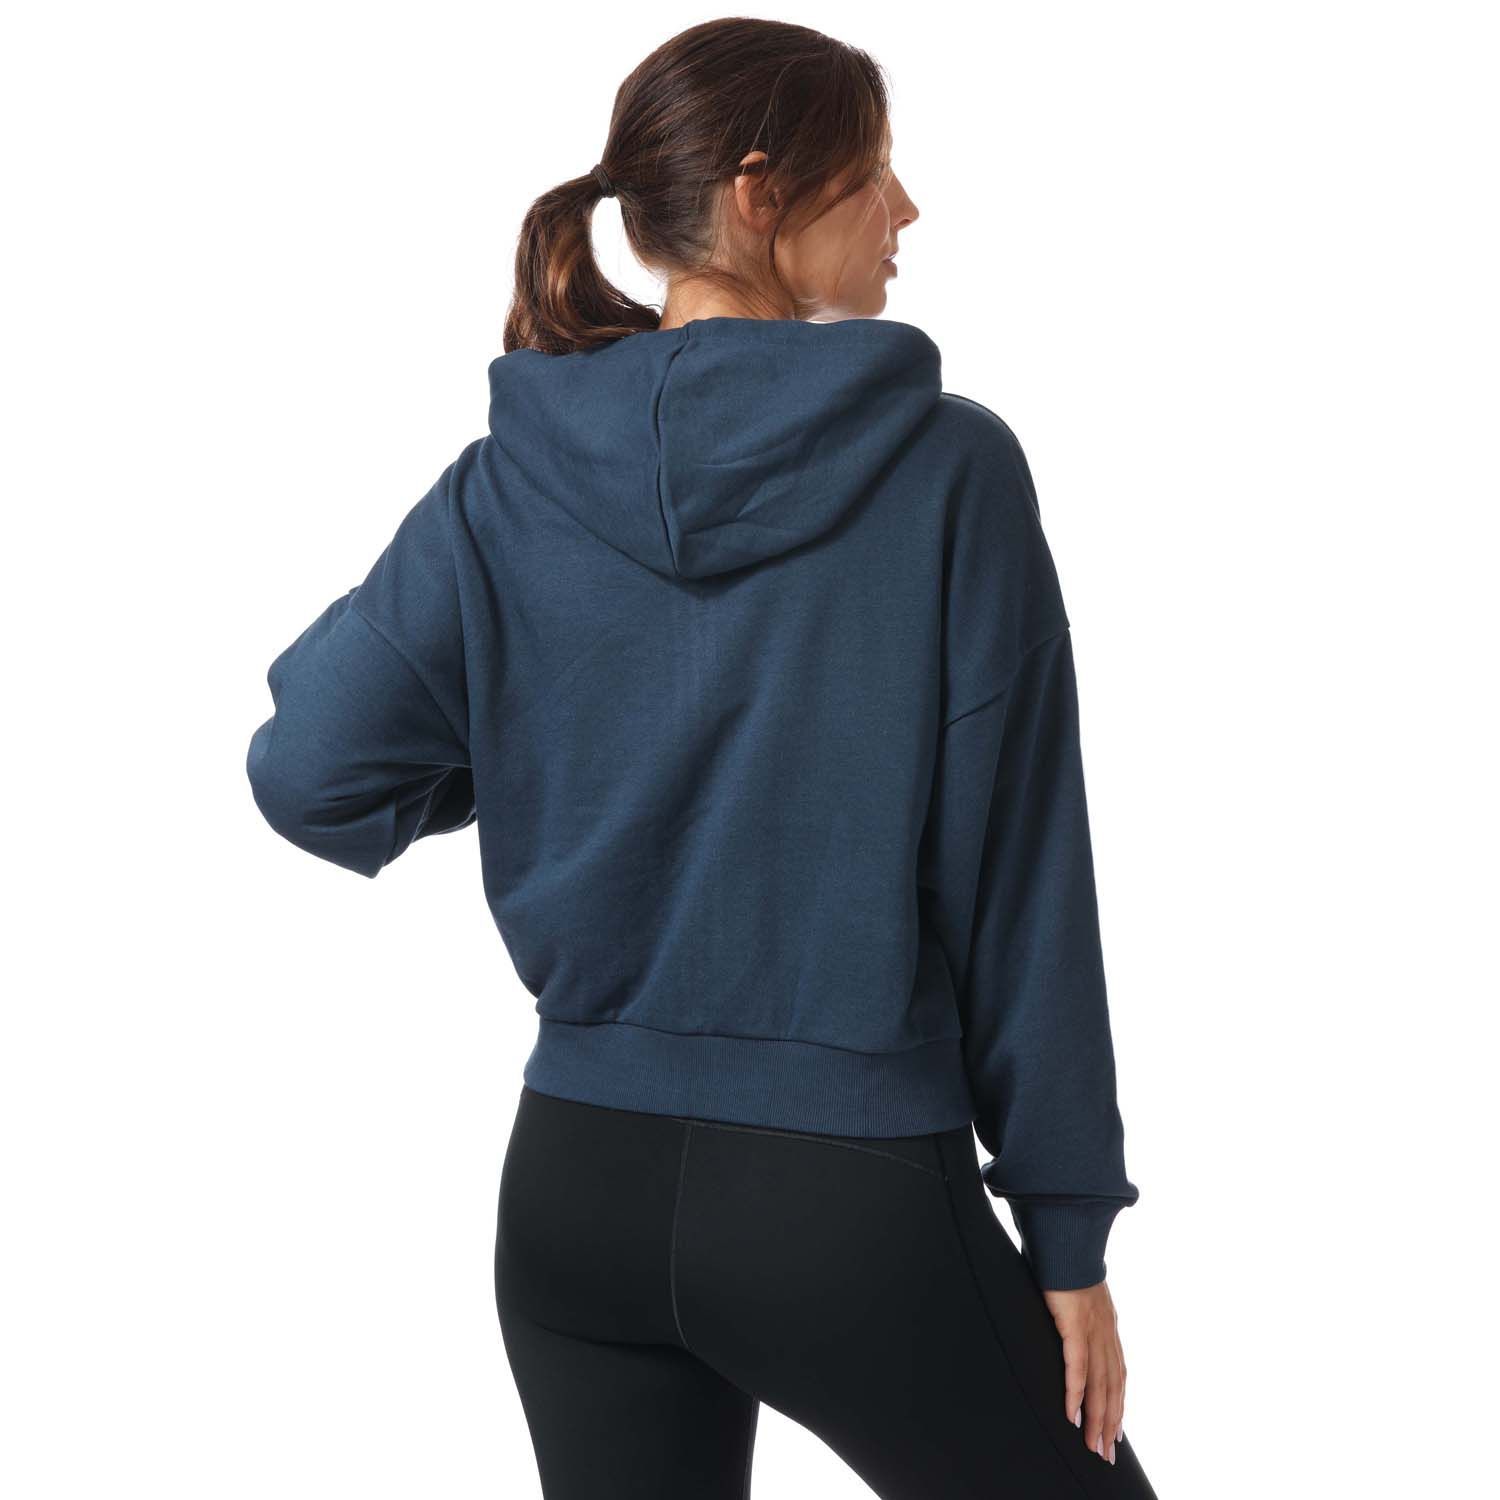 Womens adidas Essentials 3- Stripes Zip Hoody in navy.- Lined drawcord hood. - Long sleeves.- Full fastening.- Split pouch pocket.- Ribbed cuffs and hem.- Embroidered branding.- Straight hem.- Main Material: 53% Cotton  36% Polyester (Recycled)  11% Rayon. Hood Lining: 100% Cotton.- Ref: GL1463